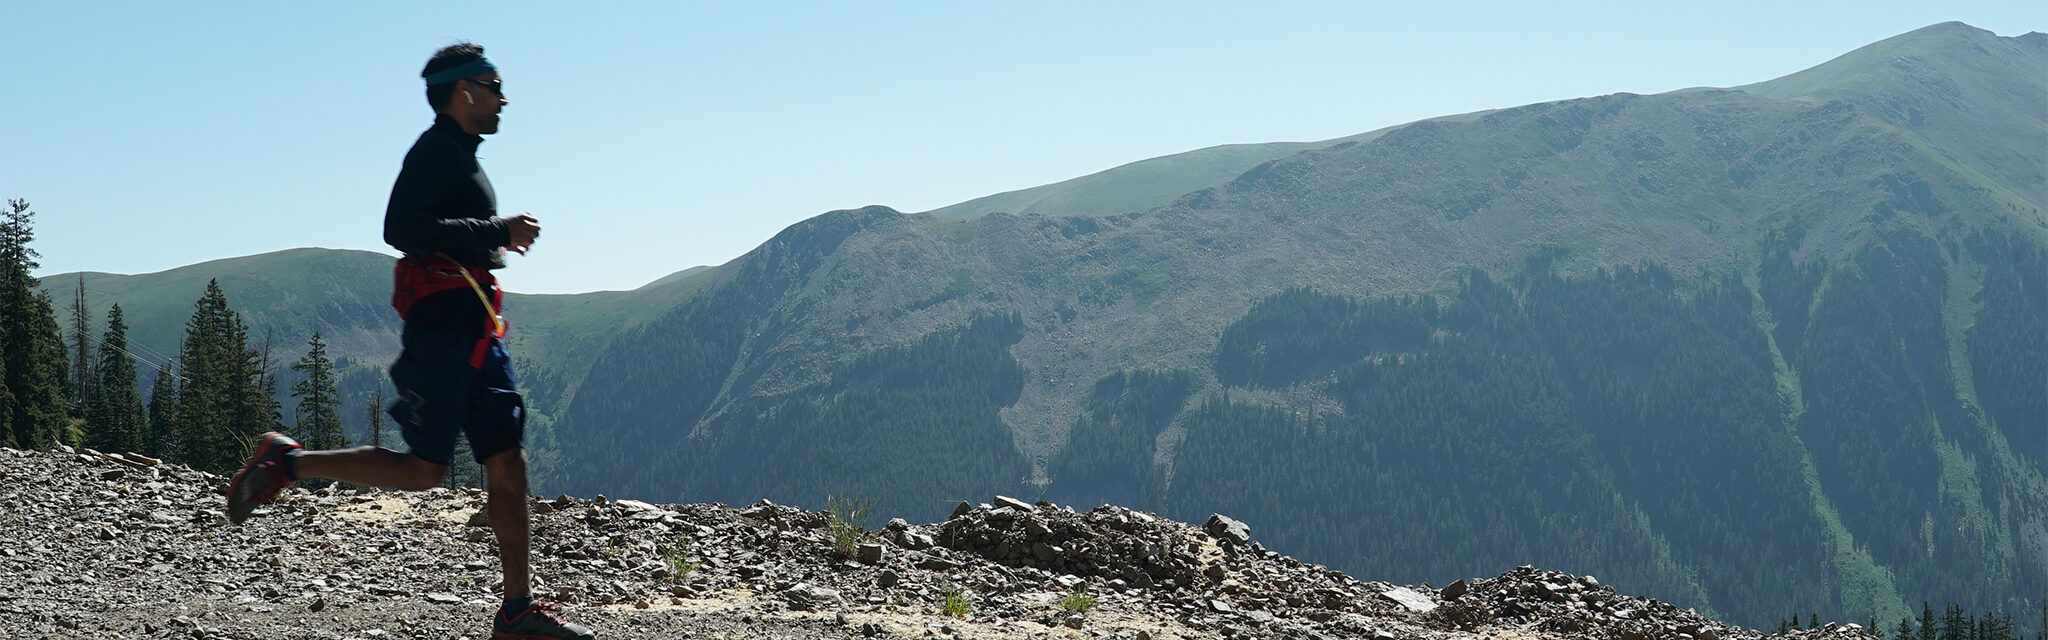 A lone runner in front of a mountain backdrop in a challenging 10k trail run